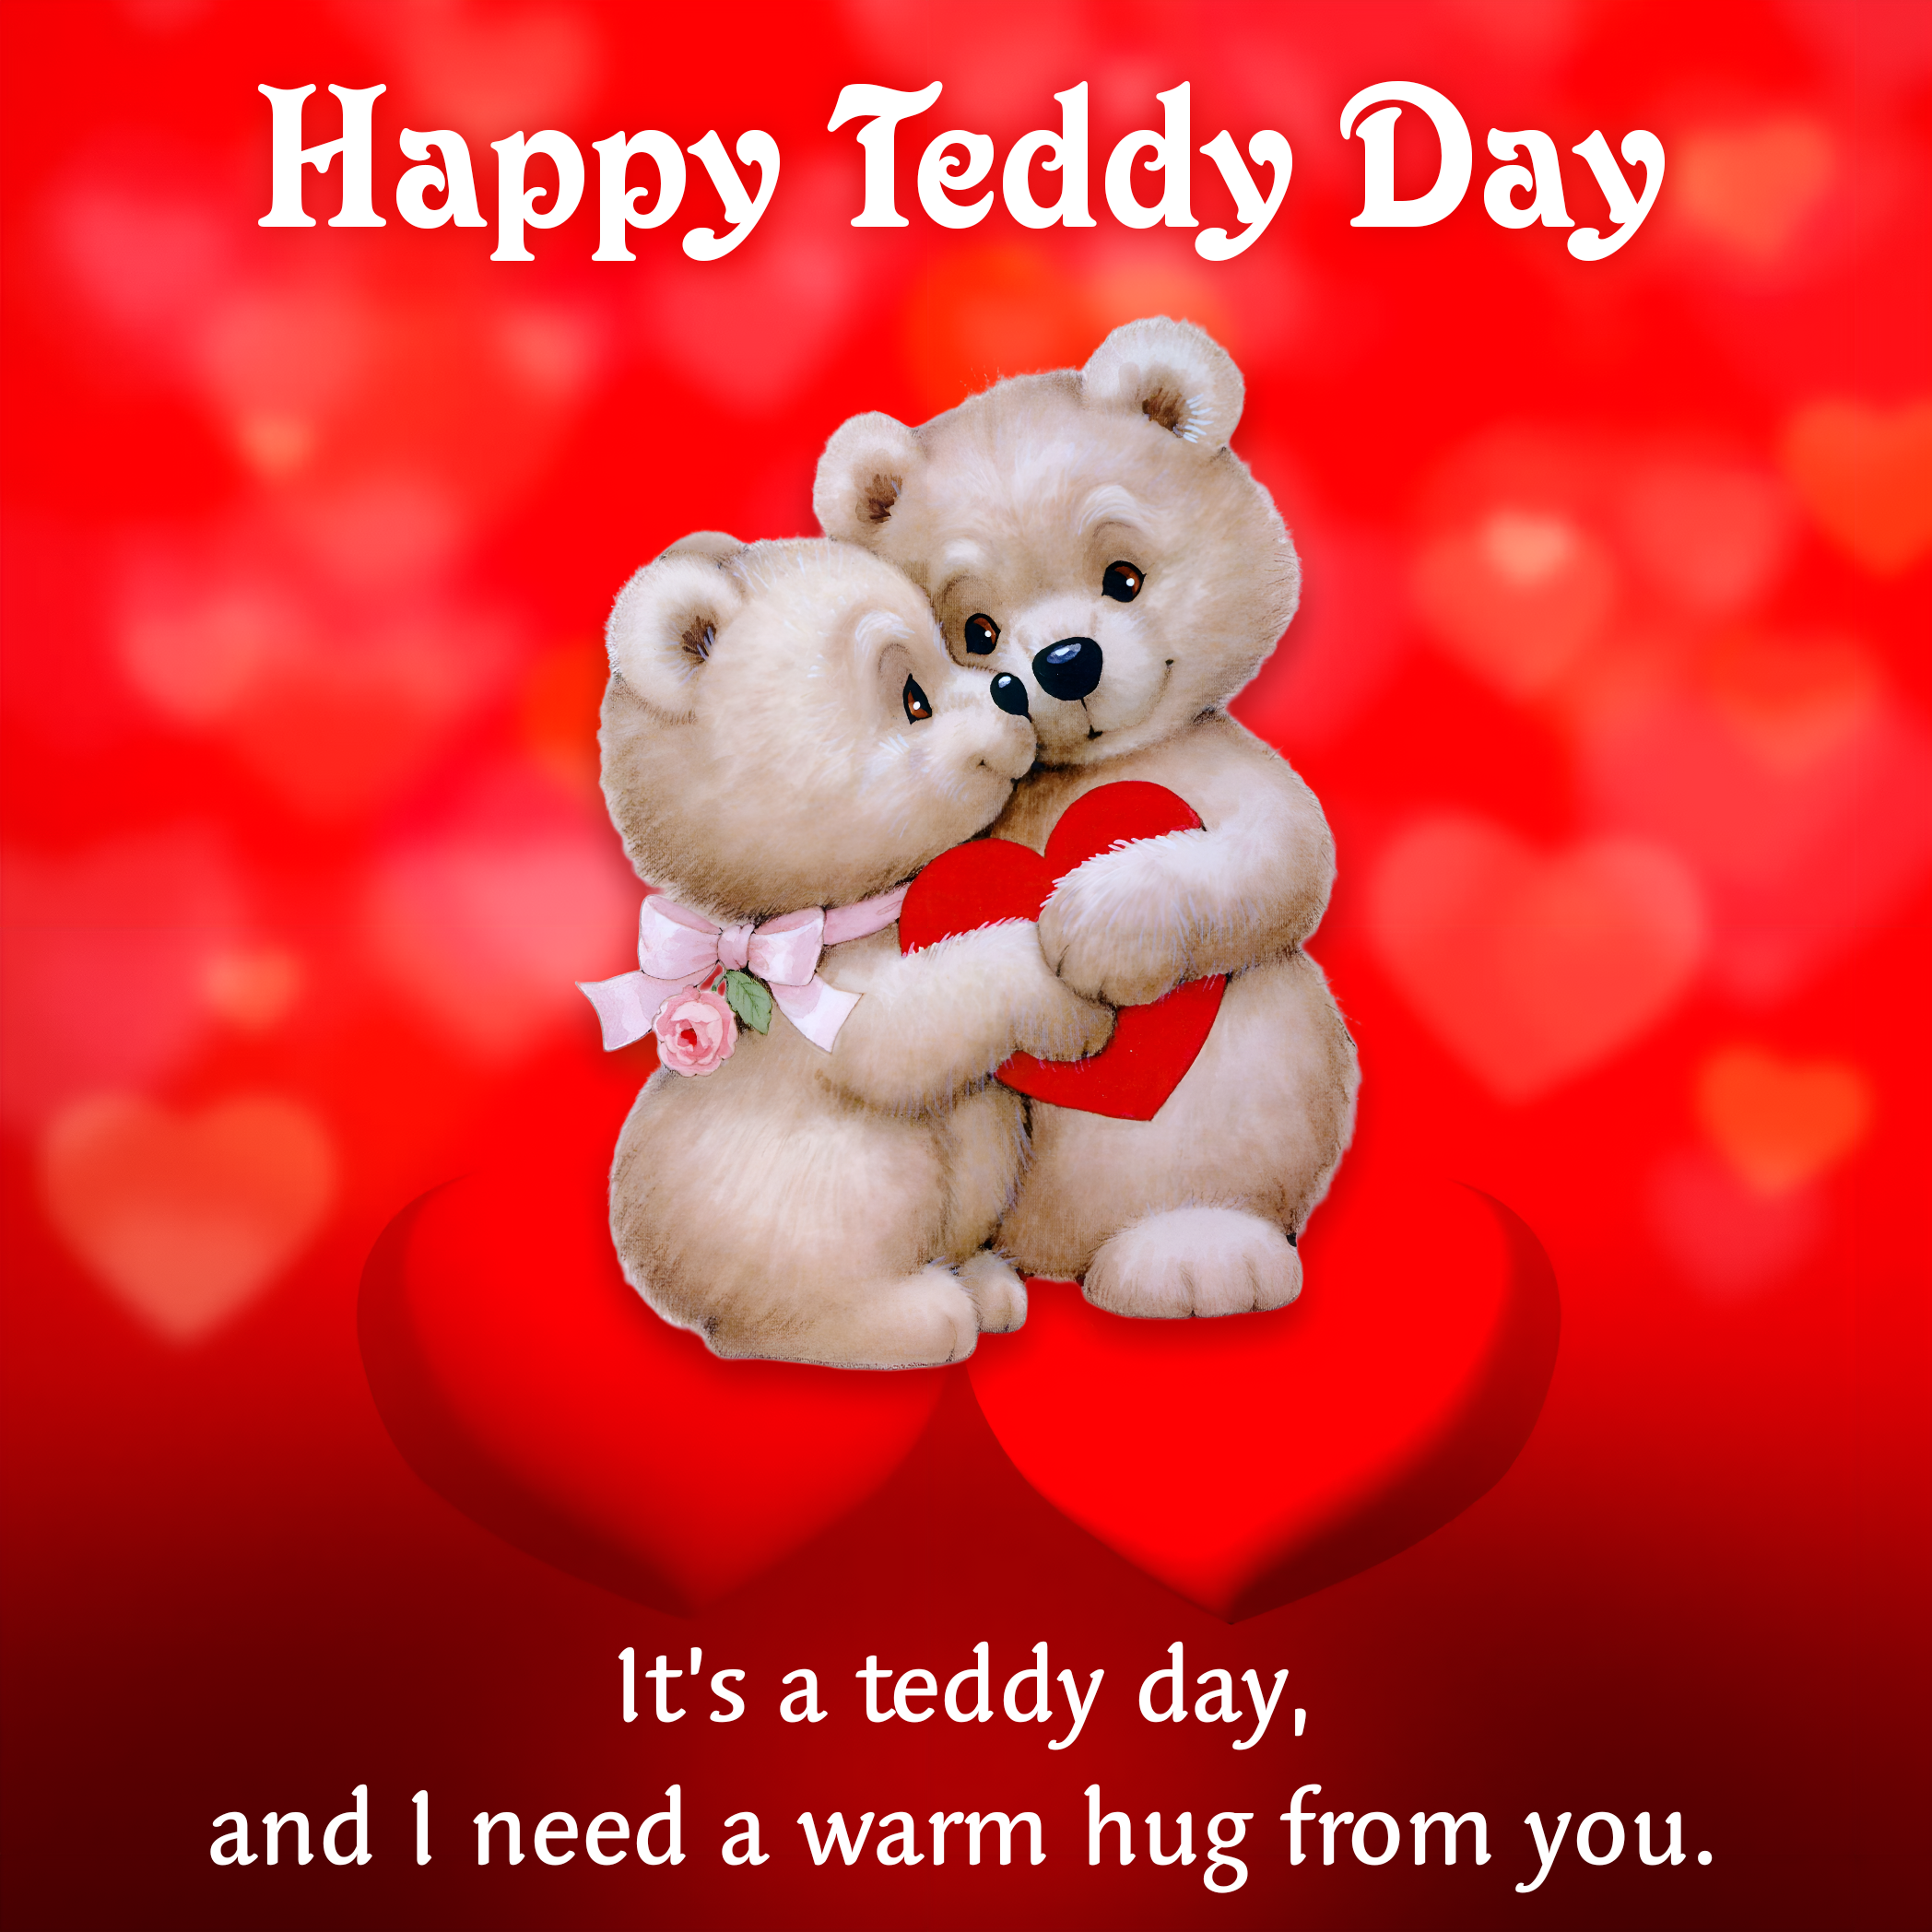 Its a teddy day and I need a warm hug from you